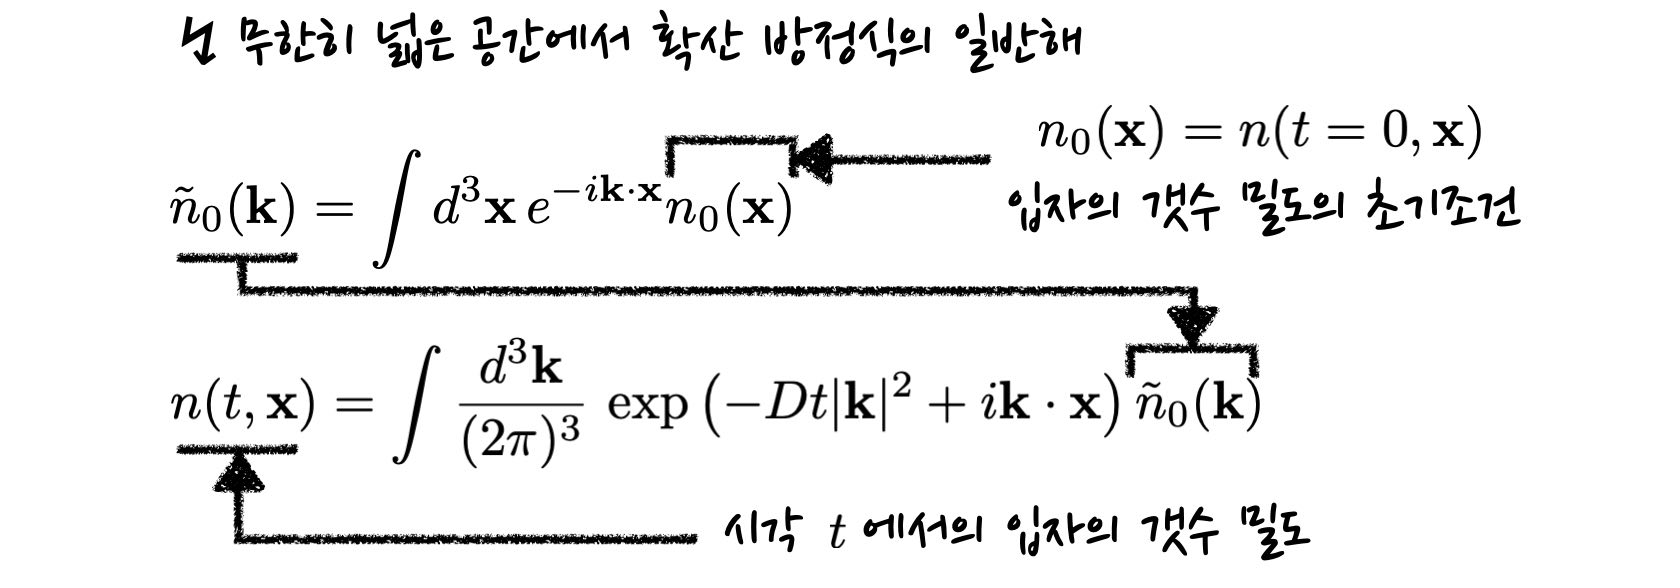 formulae for solution to the diffusion equation with initial condition in the infinite space. The solution is obtained by Fourier transform.